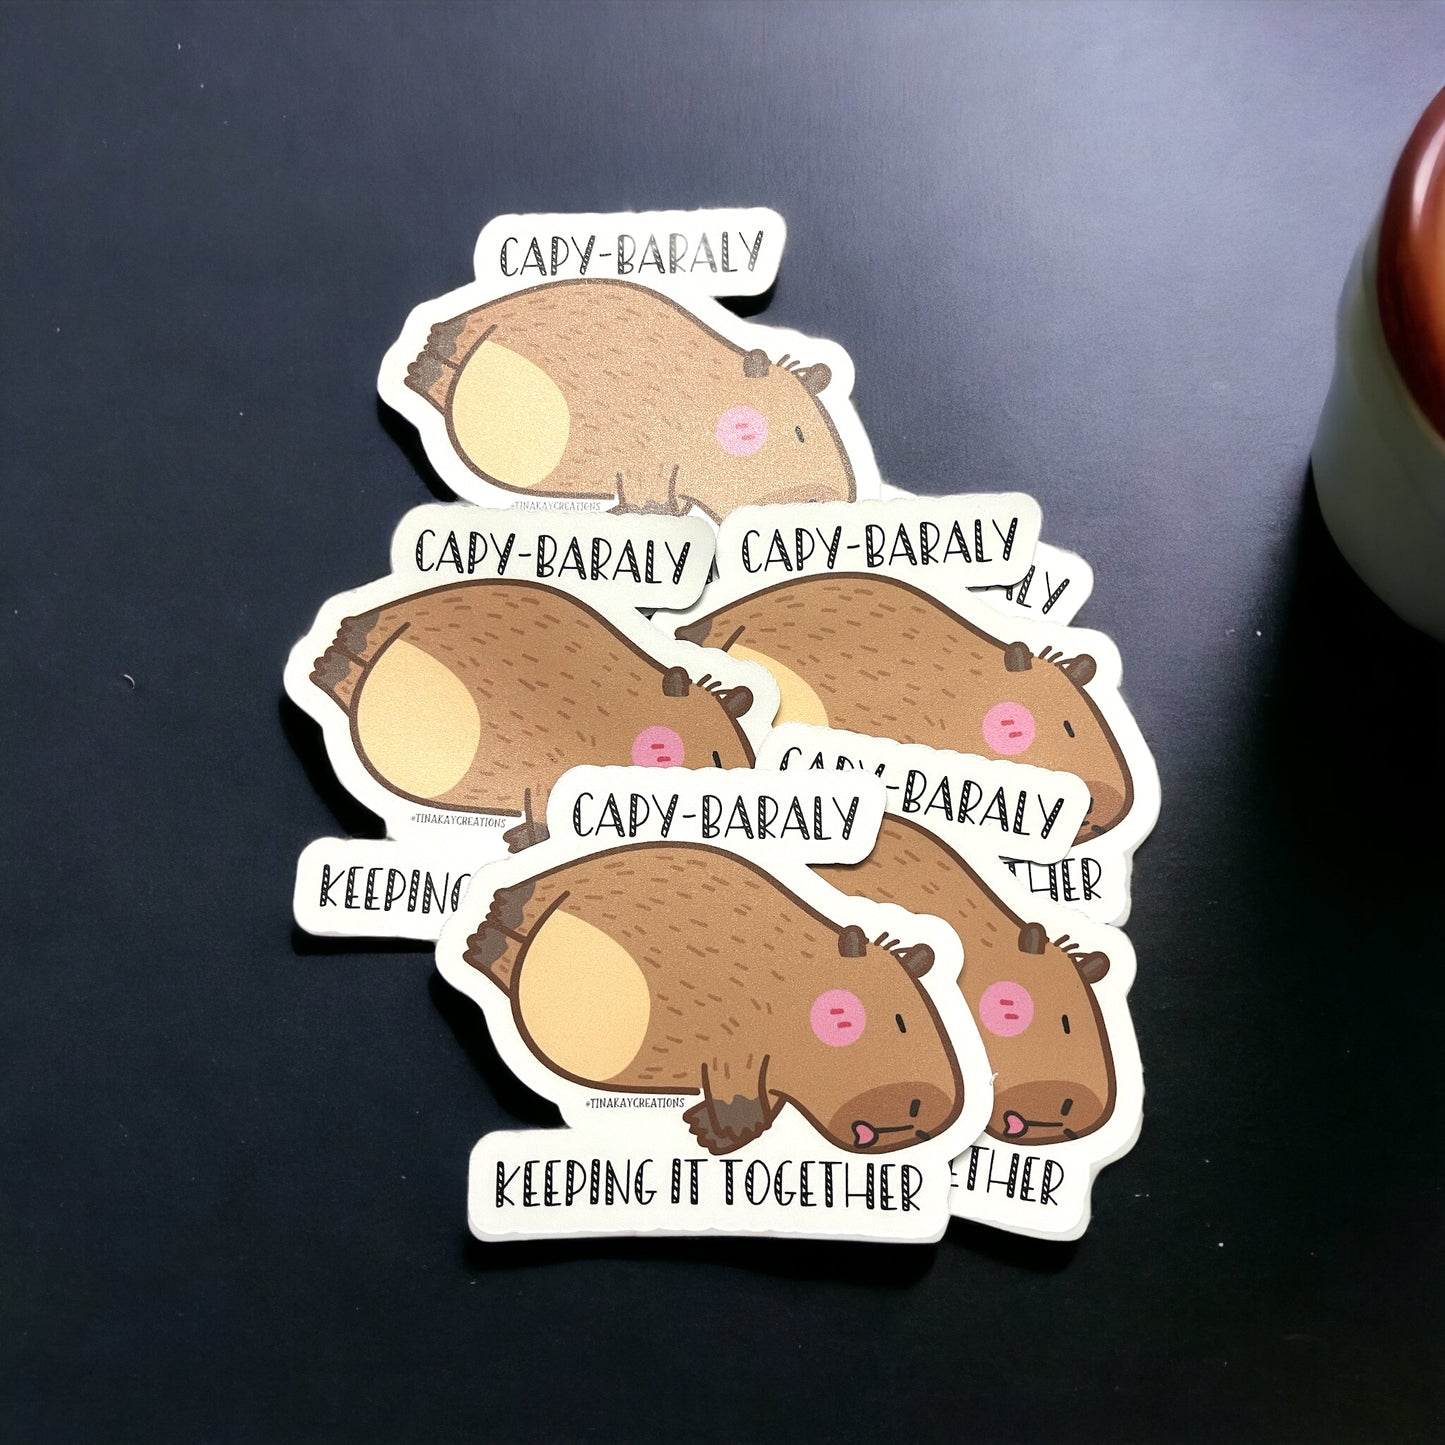 Barely keeping it Together with Capy-baraly Tired Capybara - Matte Vinyl Water Resistant Sticker